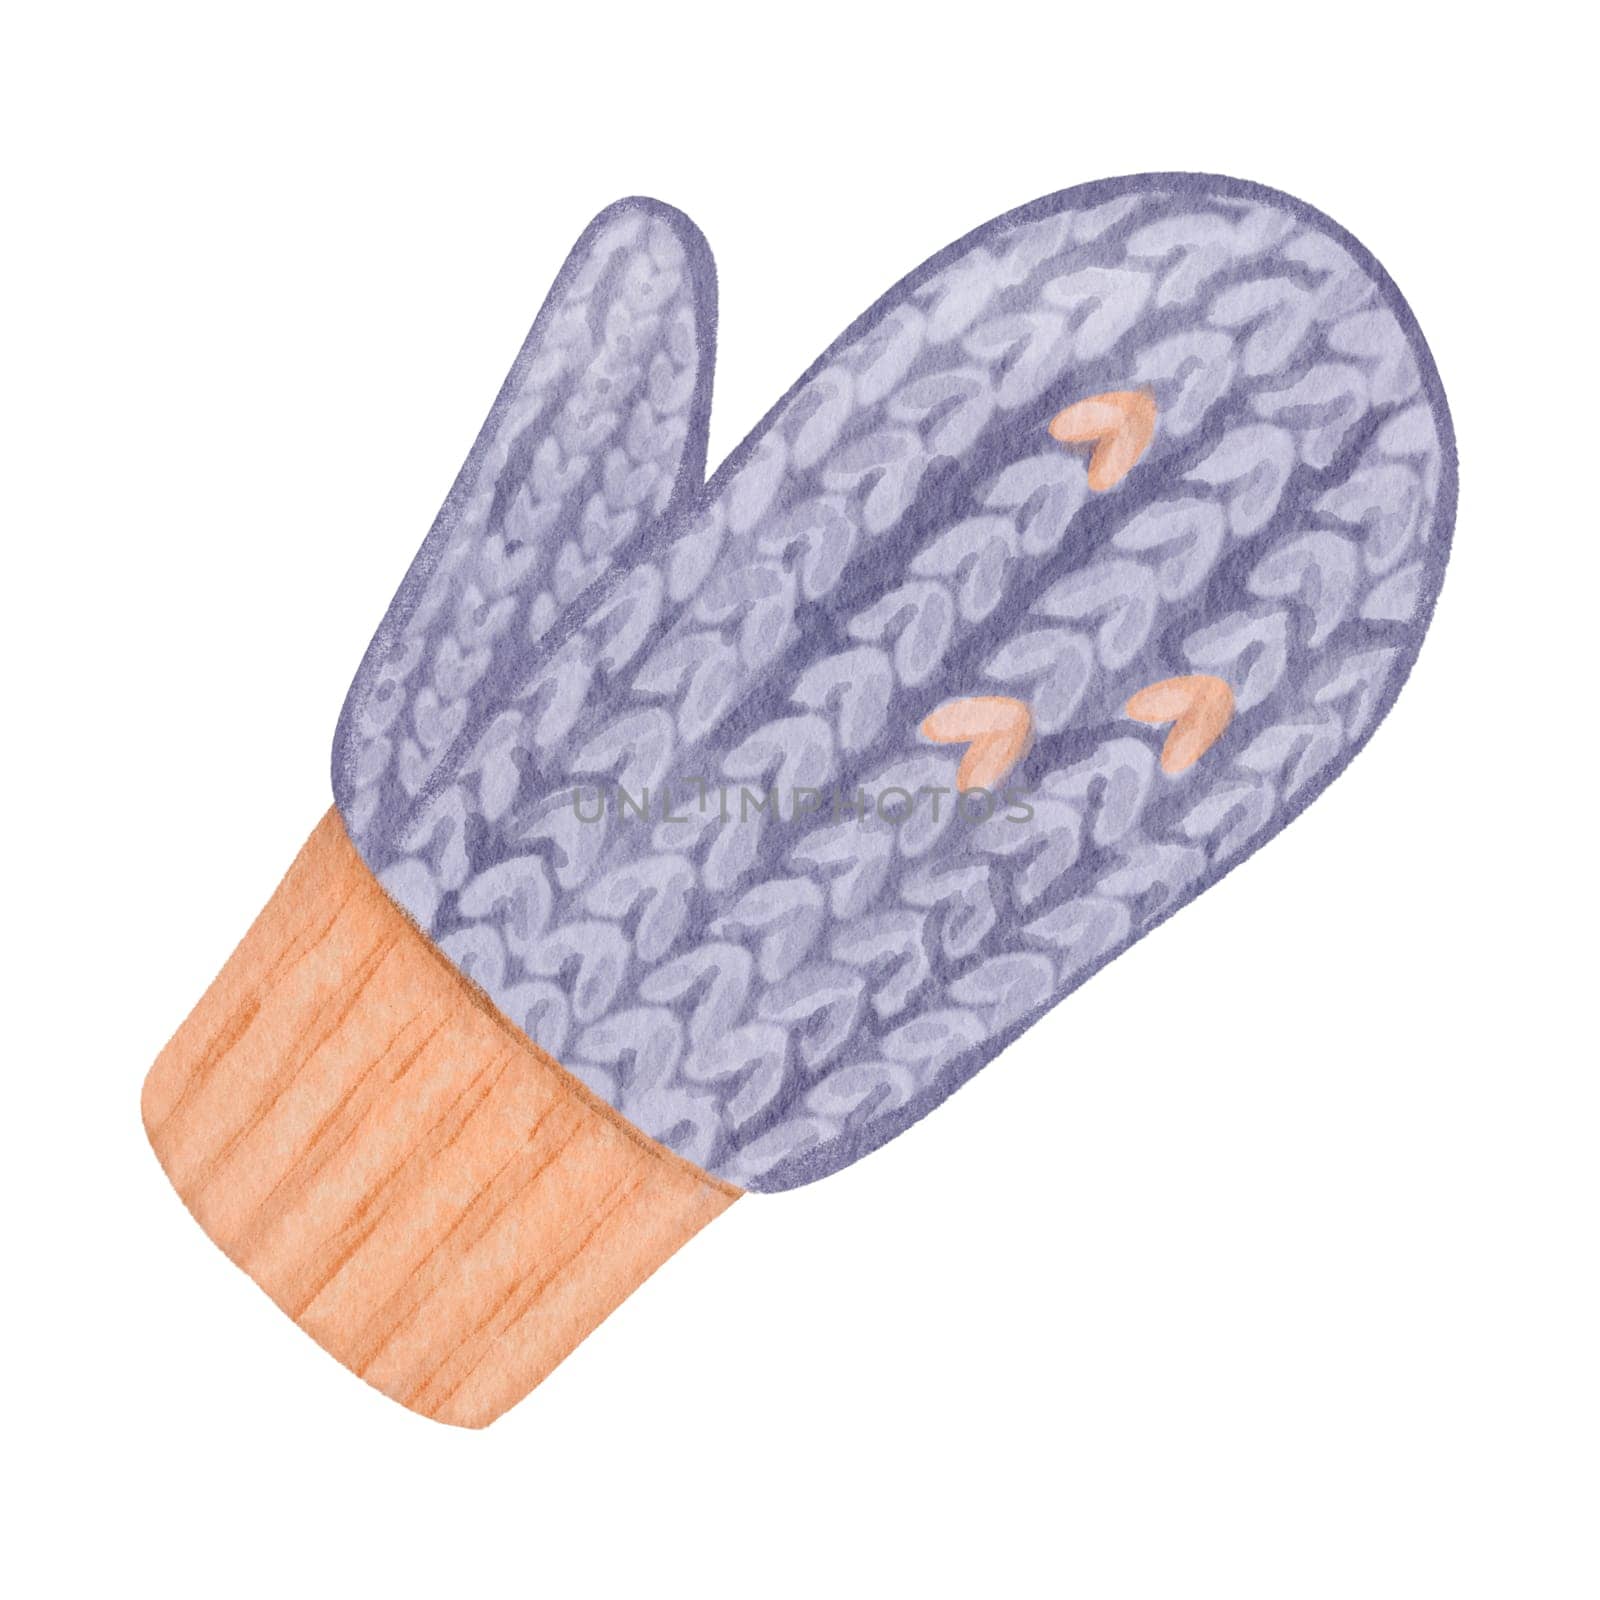 A knitted mitten. Winter clothing item. Purple and orange colors. Isolated watercolor object. Perfect for winter fashion designs, seasonal illustrations, or cold-weather themed graphics.